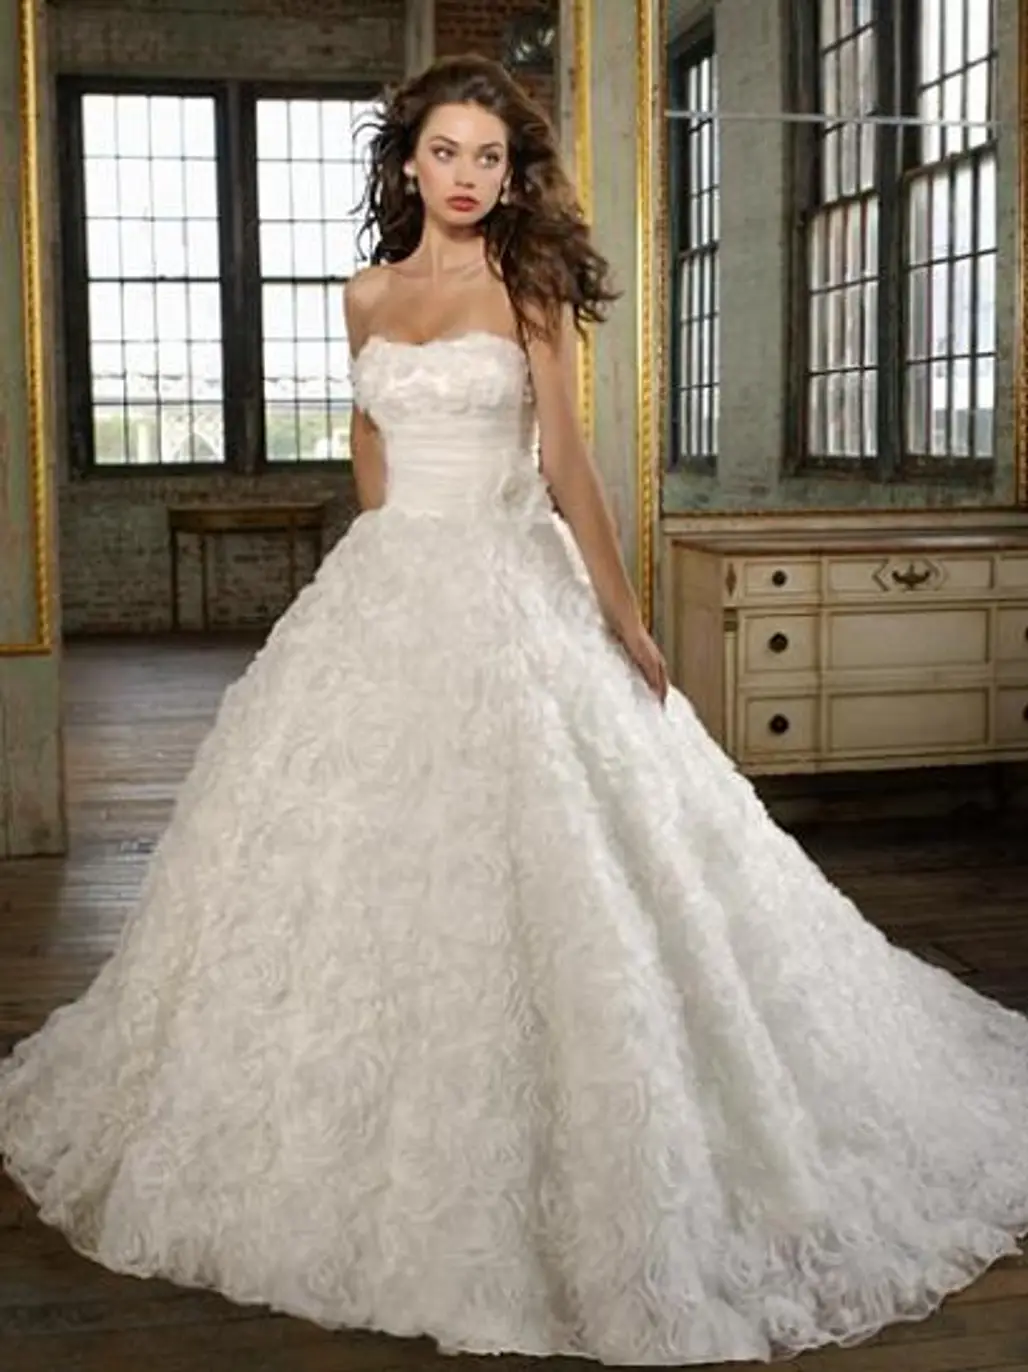 Ball Gowns: for the Princess with Hips...